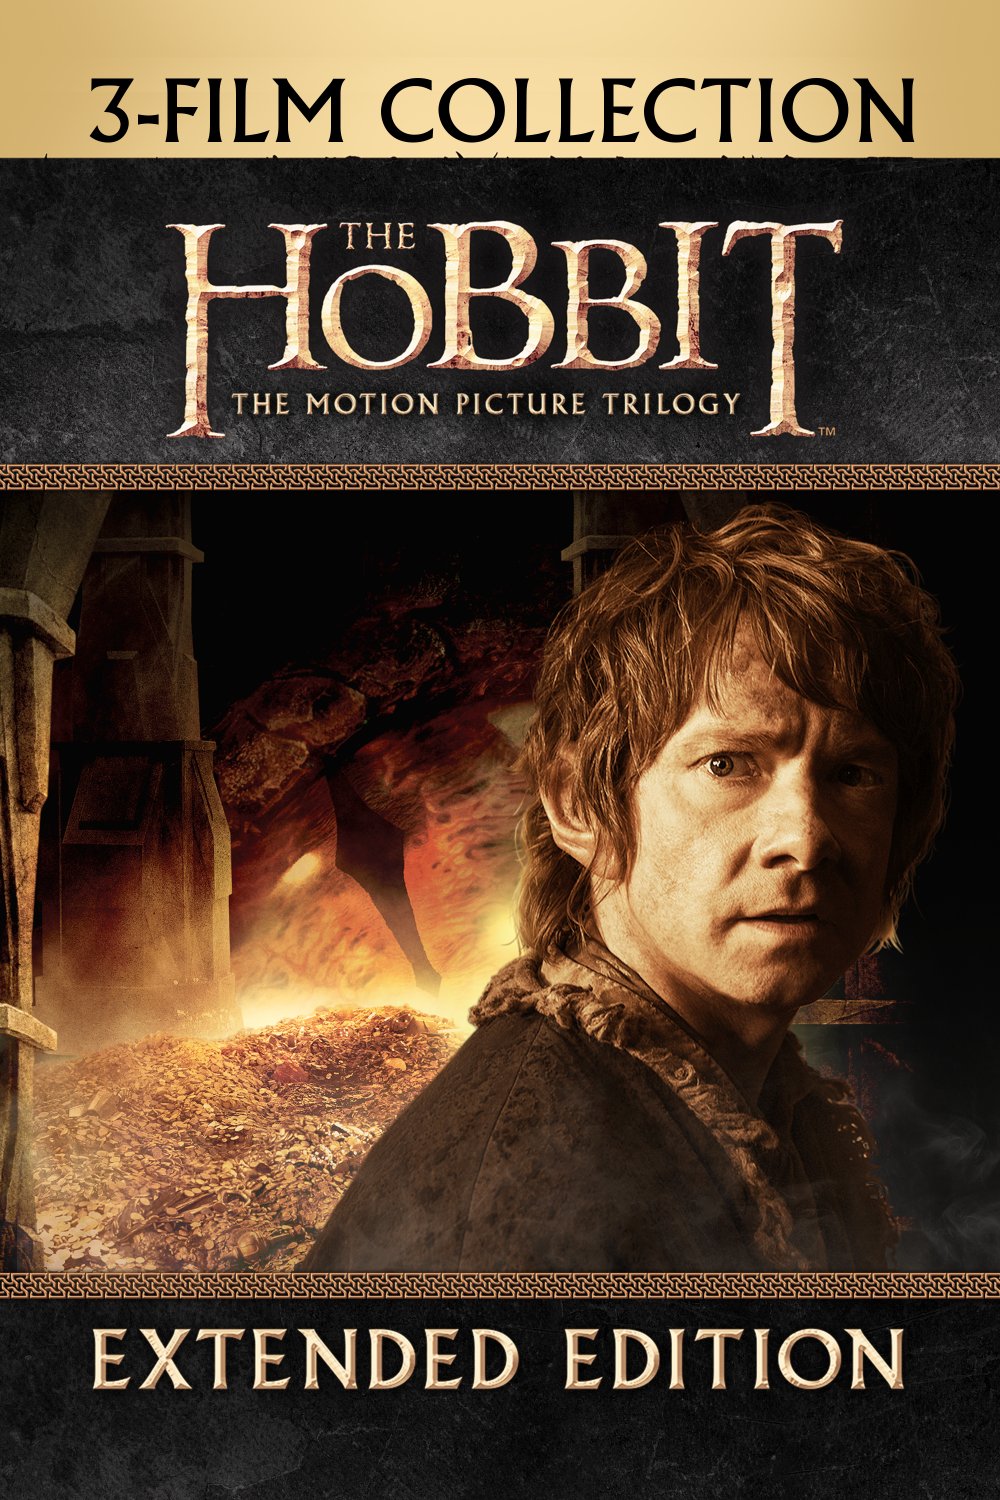 The Hobbit: An Unexpected Journey (2012) - Movie Review